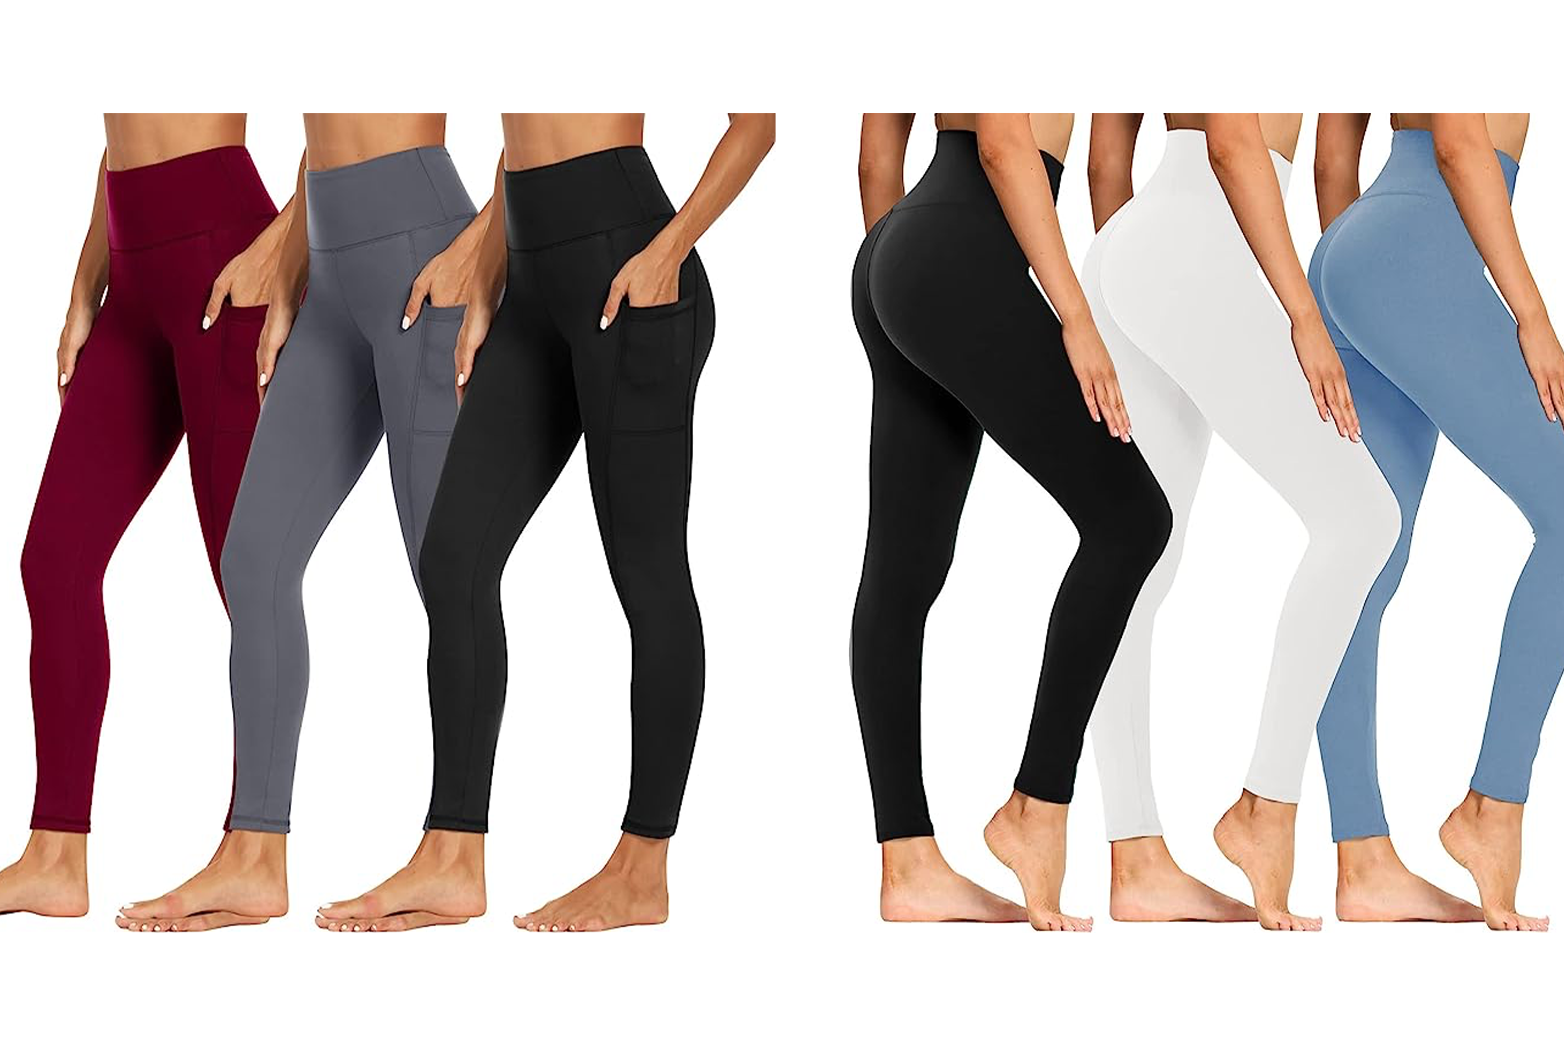 Syrinx High Waisted Leggings for Women in colors (from left to right) in front view red, grey, & black, in rear view black, white, & light blue.